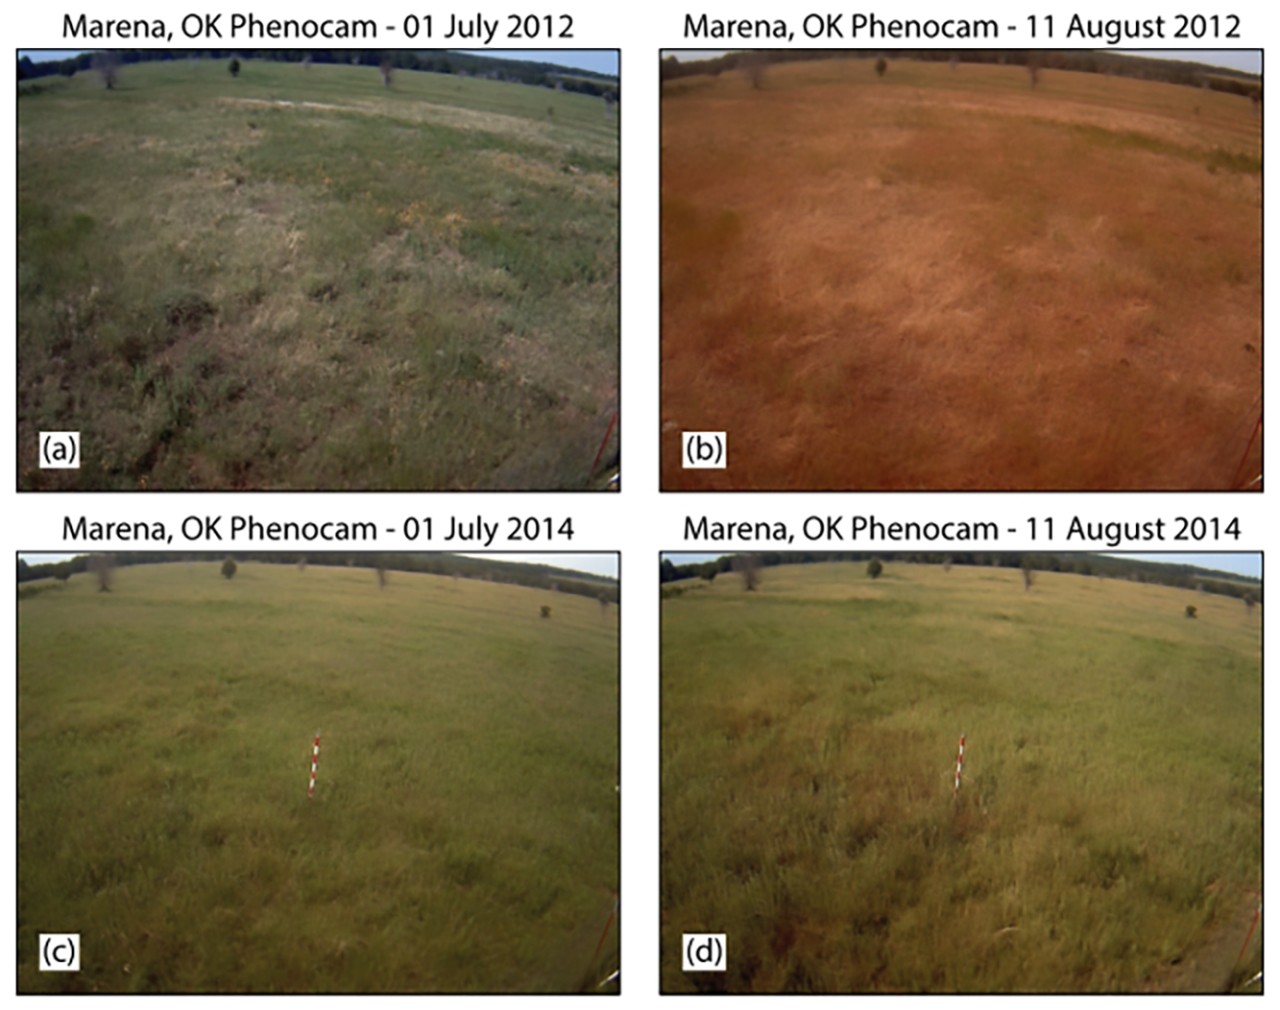 camera images of grasses during drought